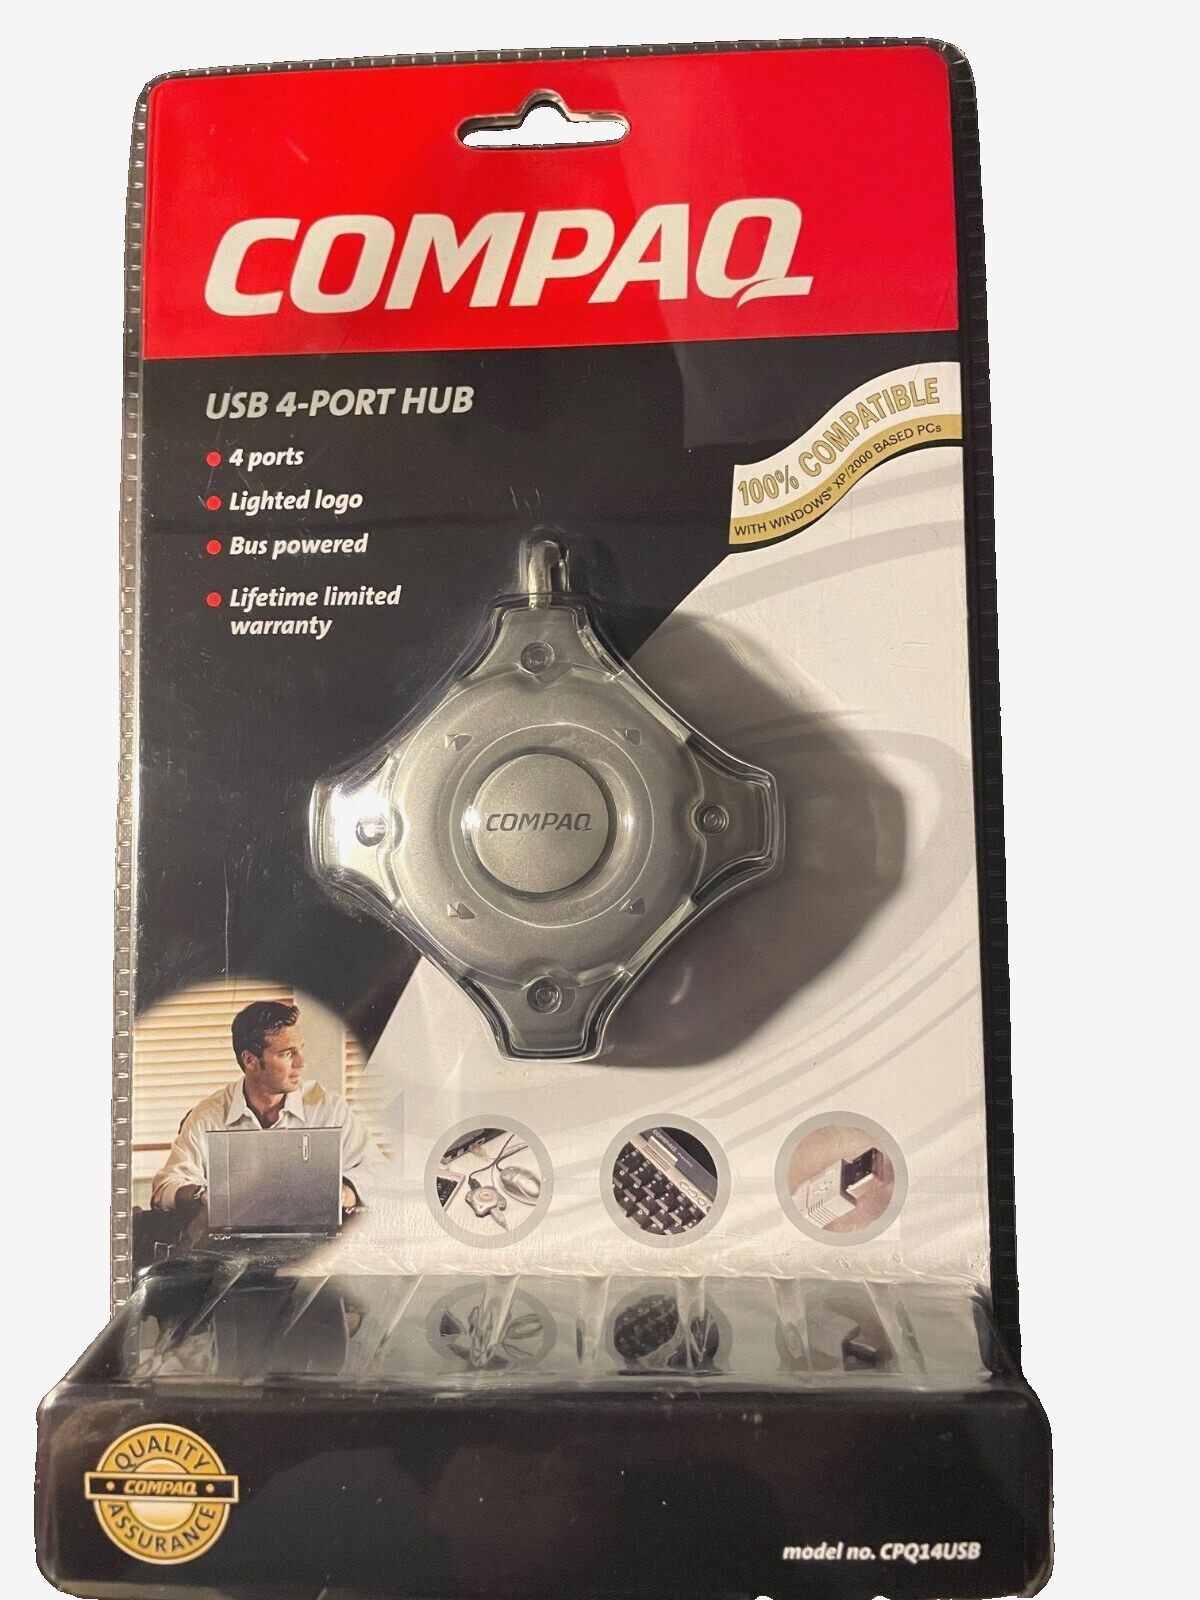 COMPAQ USB  4 PORT HUB FOR USE WITH WINDOWS 2000/XP  NEW UNOPENED